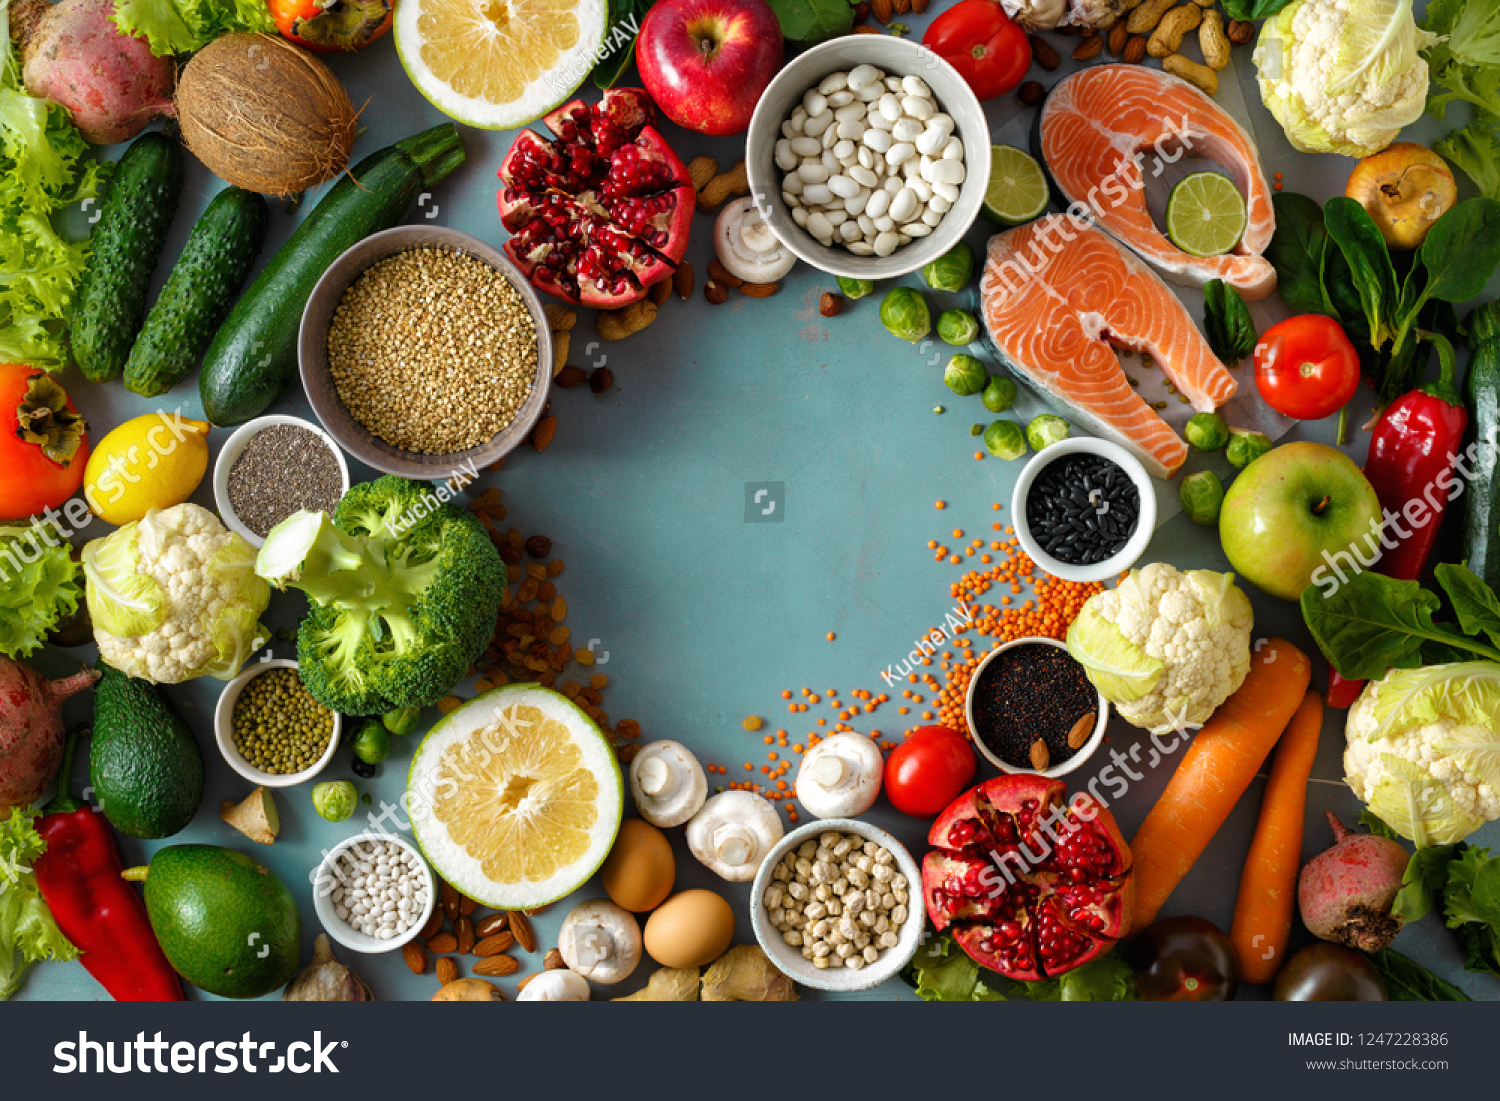 Top view frame of healthy and diet food (cereals, seeds, fish, vegetables and fruits). Healthy and diet menu of restaurant concept #1247228386